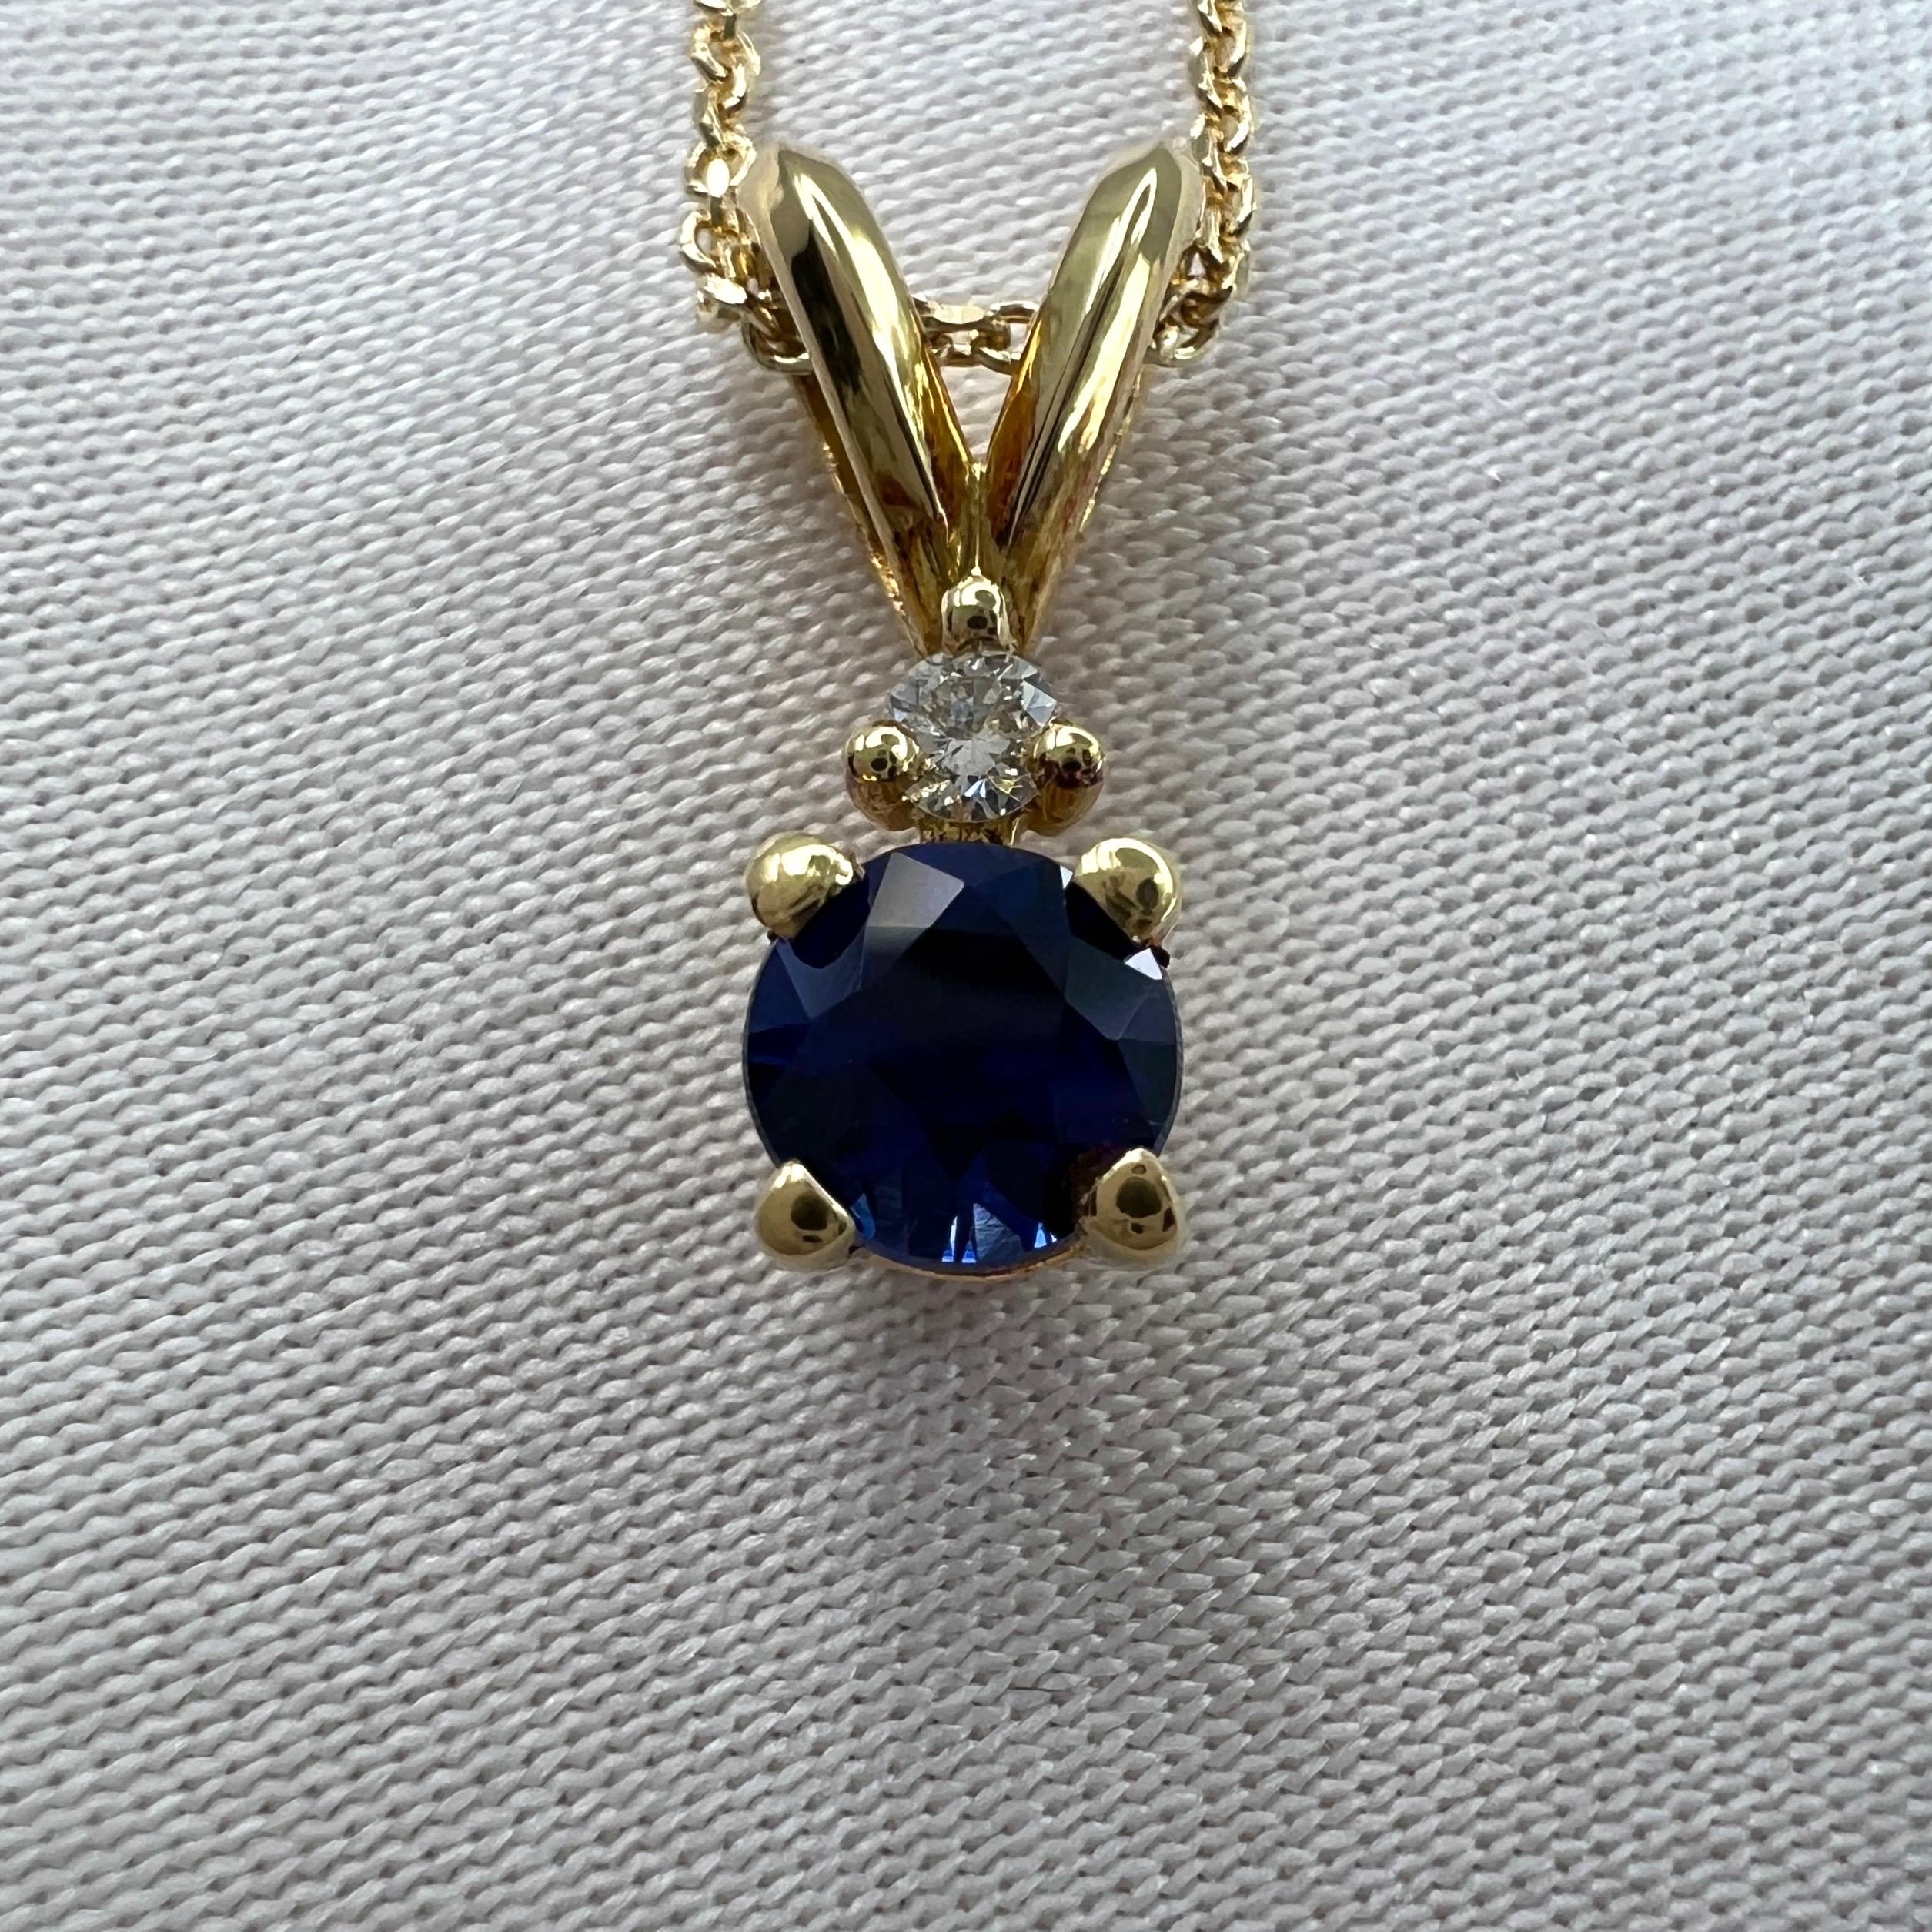 Fine Ceylon Cornflower Blue Sapphire & Diamond Round Cut 18k Yellow Gold Pendant Necklace.

A delicate 0.35 Carat Ceylon sapphire with a beautiful fine cornflower blue colour and excellent clarity, very clean stone. Also has an excellent round